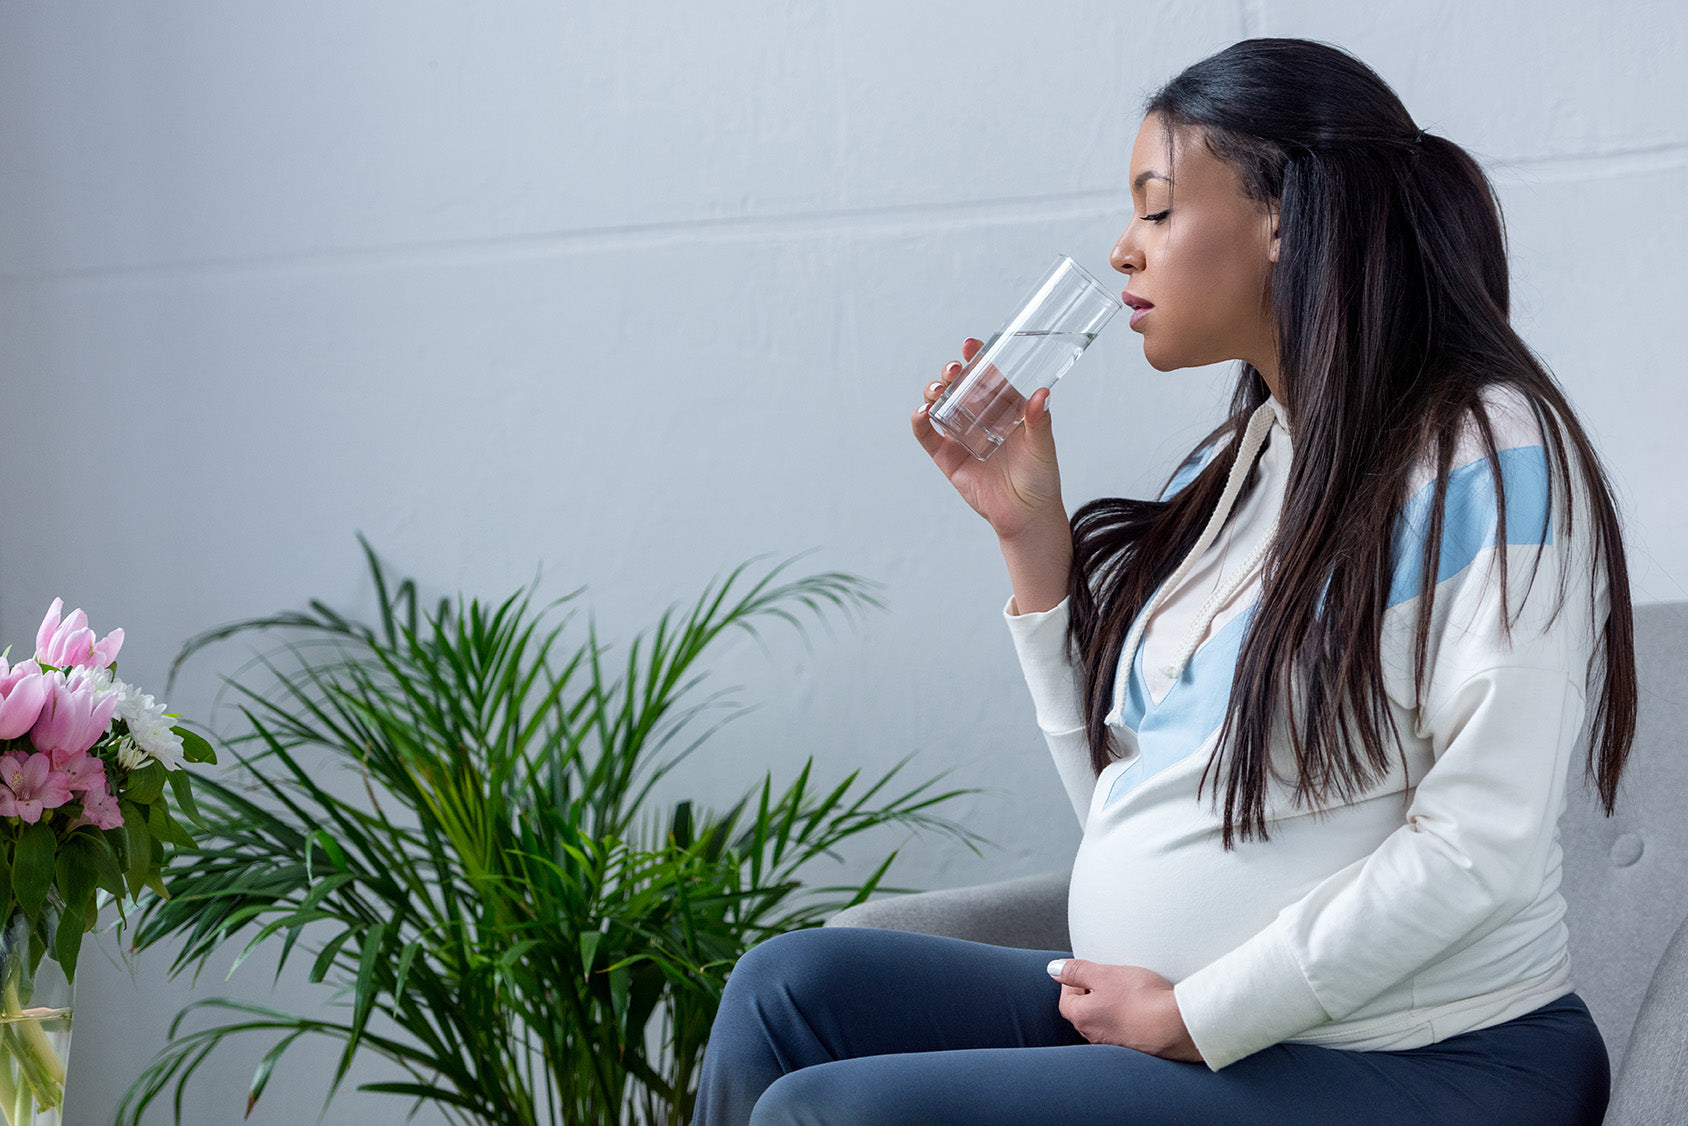 Pregnant woman drinking. Hydration & Pregnancy. Signs, symptoms of dehydration during pregnancy